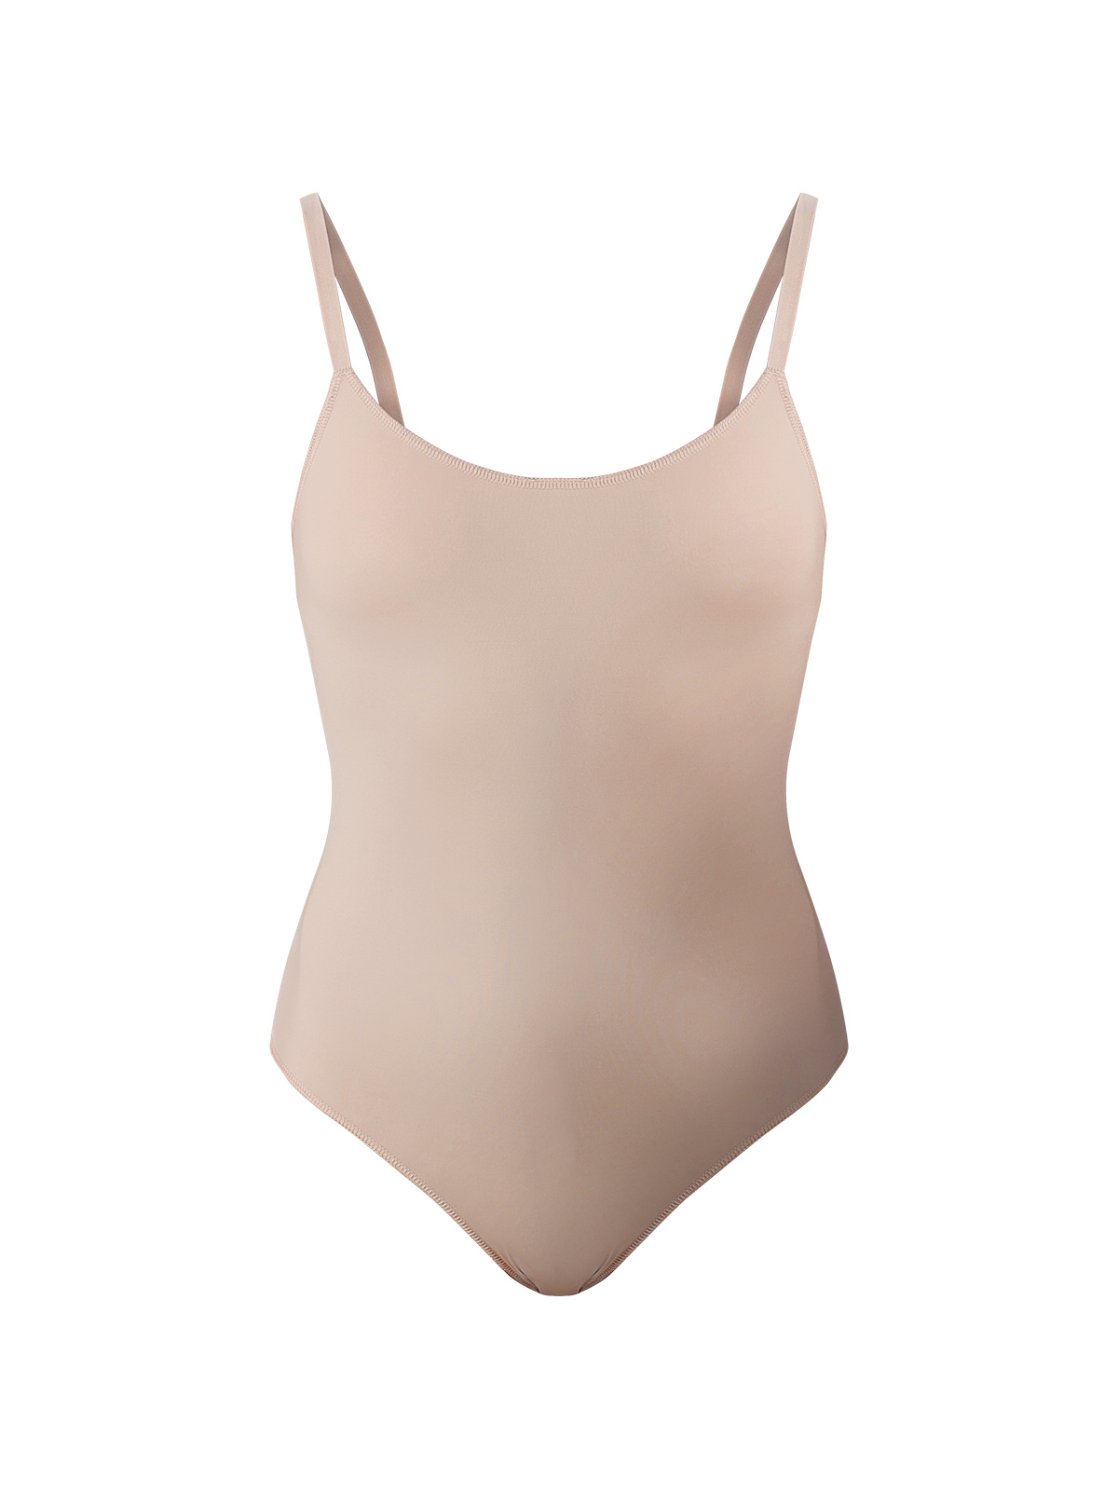 Camisole body liner with elastic straps